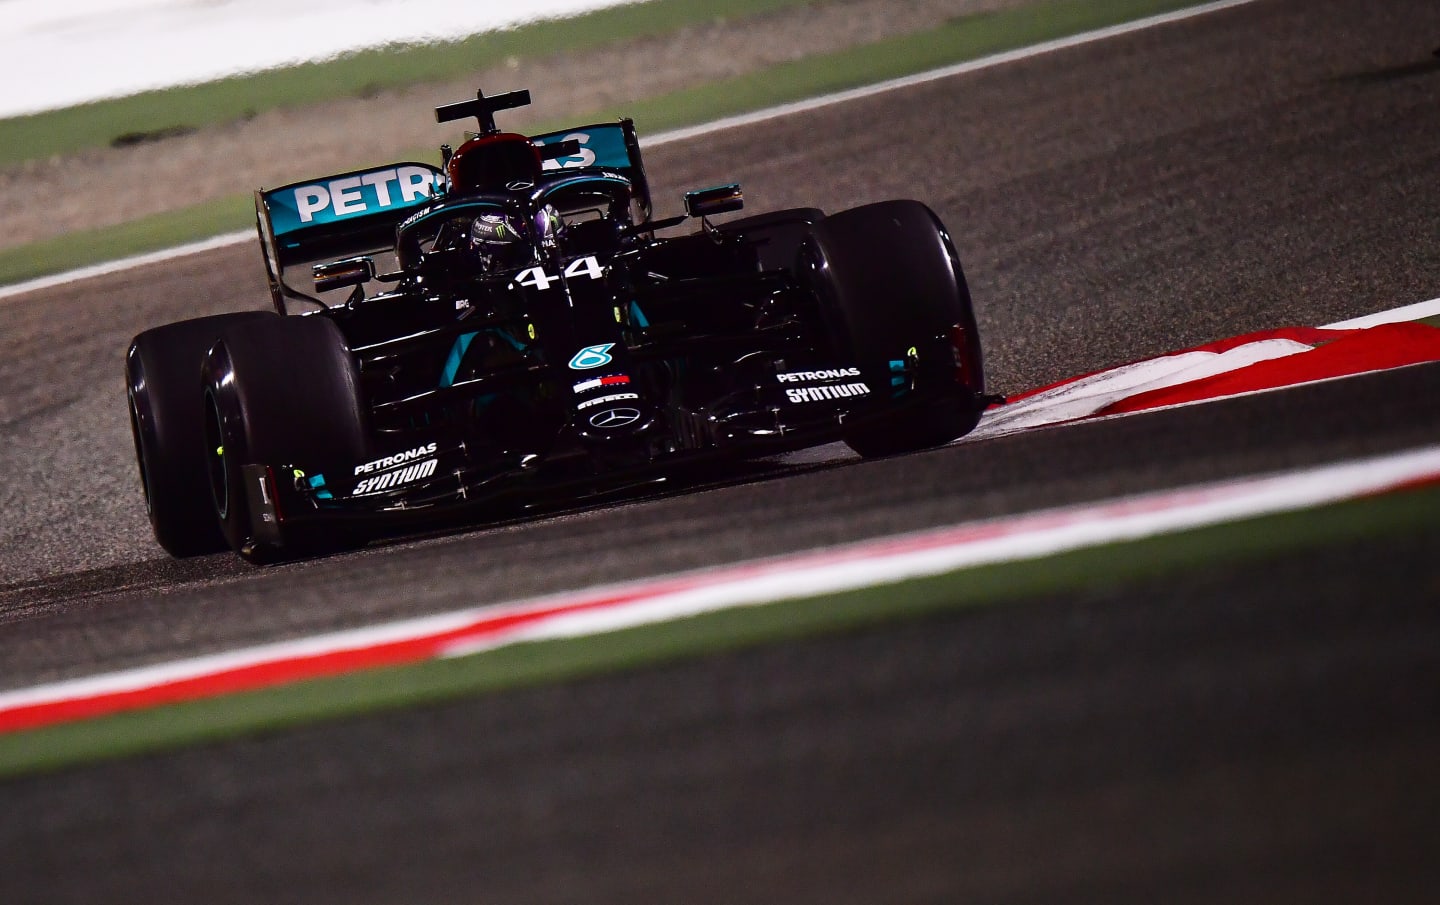 BAHRAIN, BAHRAIN - NOVEMBER 27: Lewis Hamilton of Great Britain driving the (44) Mercedes AMG Petronas F1 Team Mercedes W11 on track during practice ahead of the F1 Grand Prix of Bahrain at Bahrain International Circuit on November 27, 2020 in Bahrain, Bahrain. (Photo by Giuseppe Cacace - Pool/Getty Images)